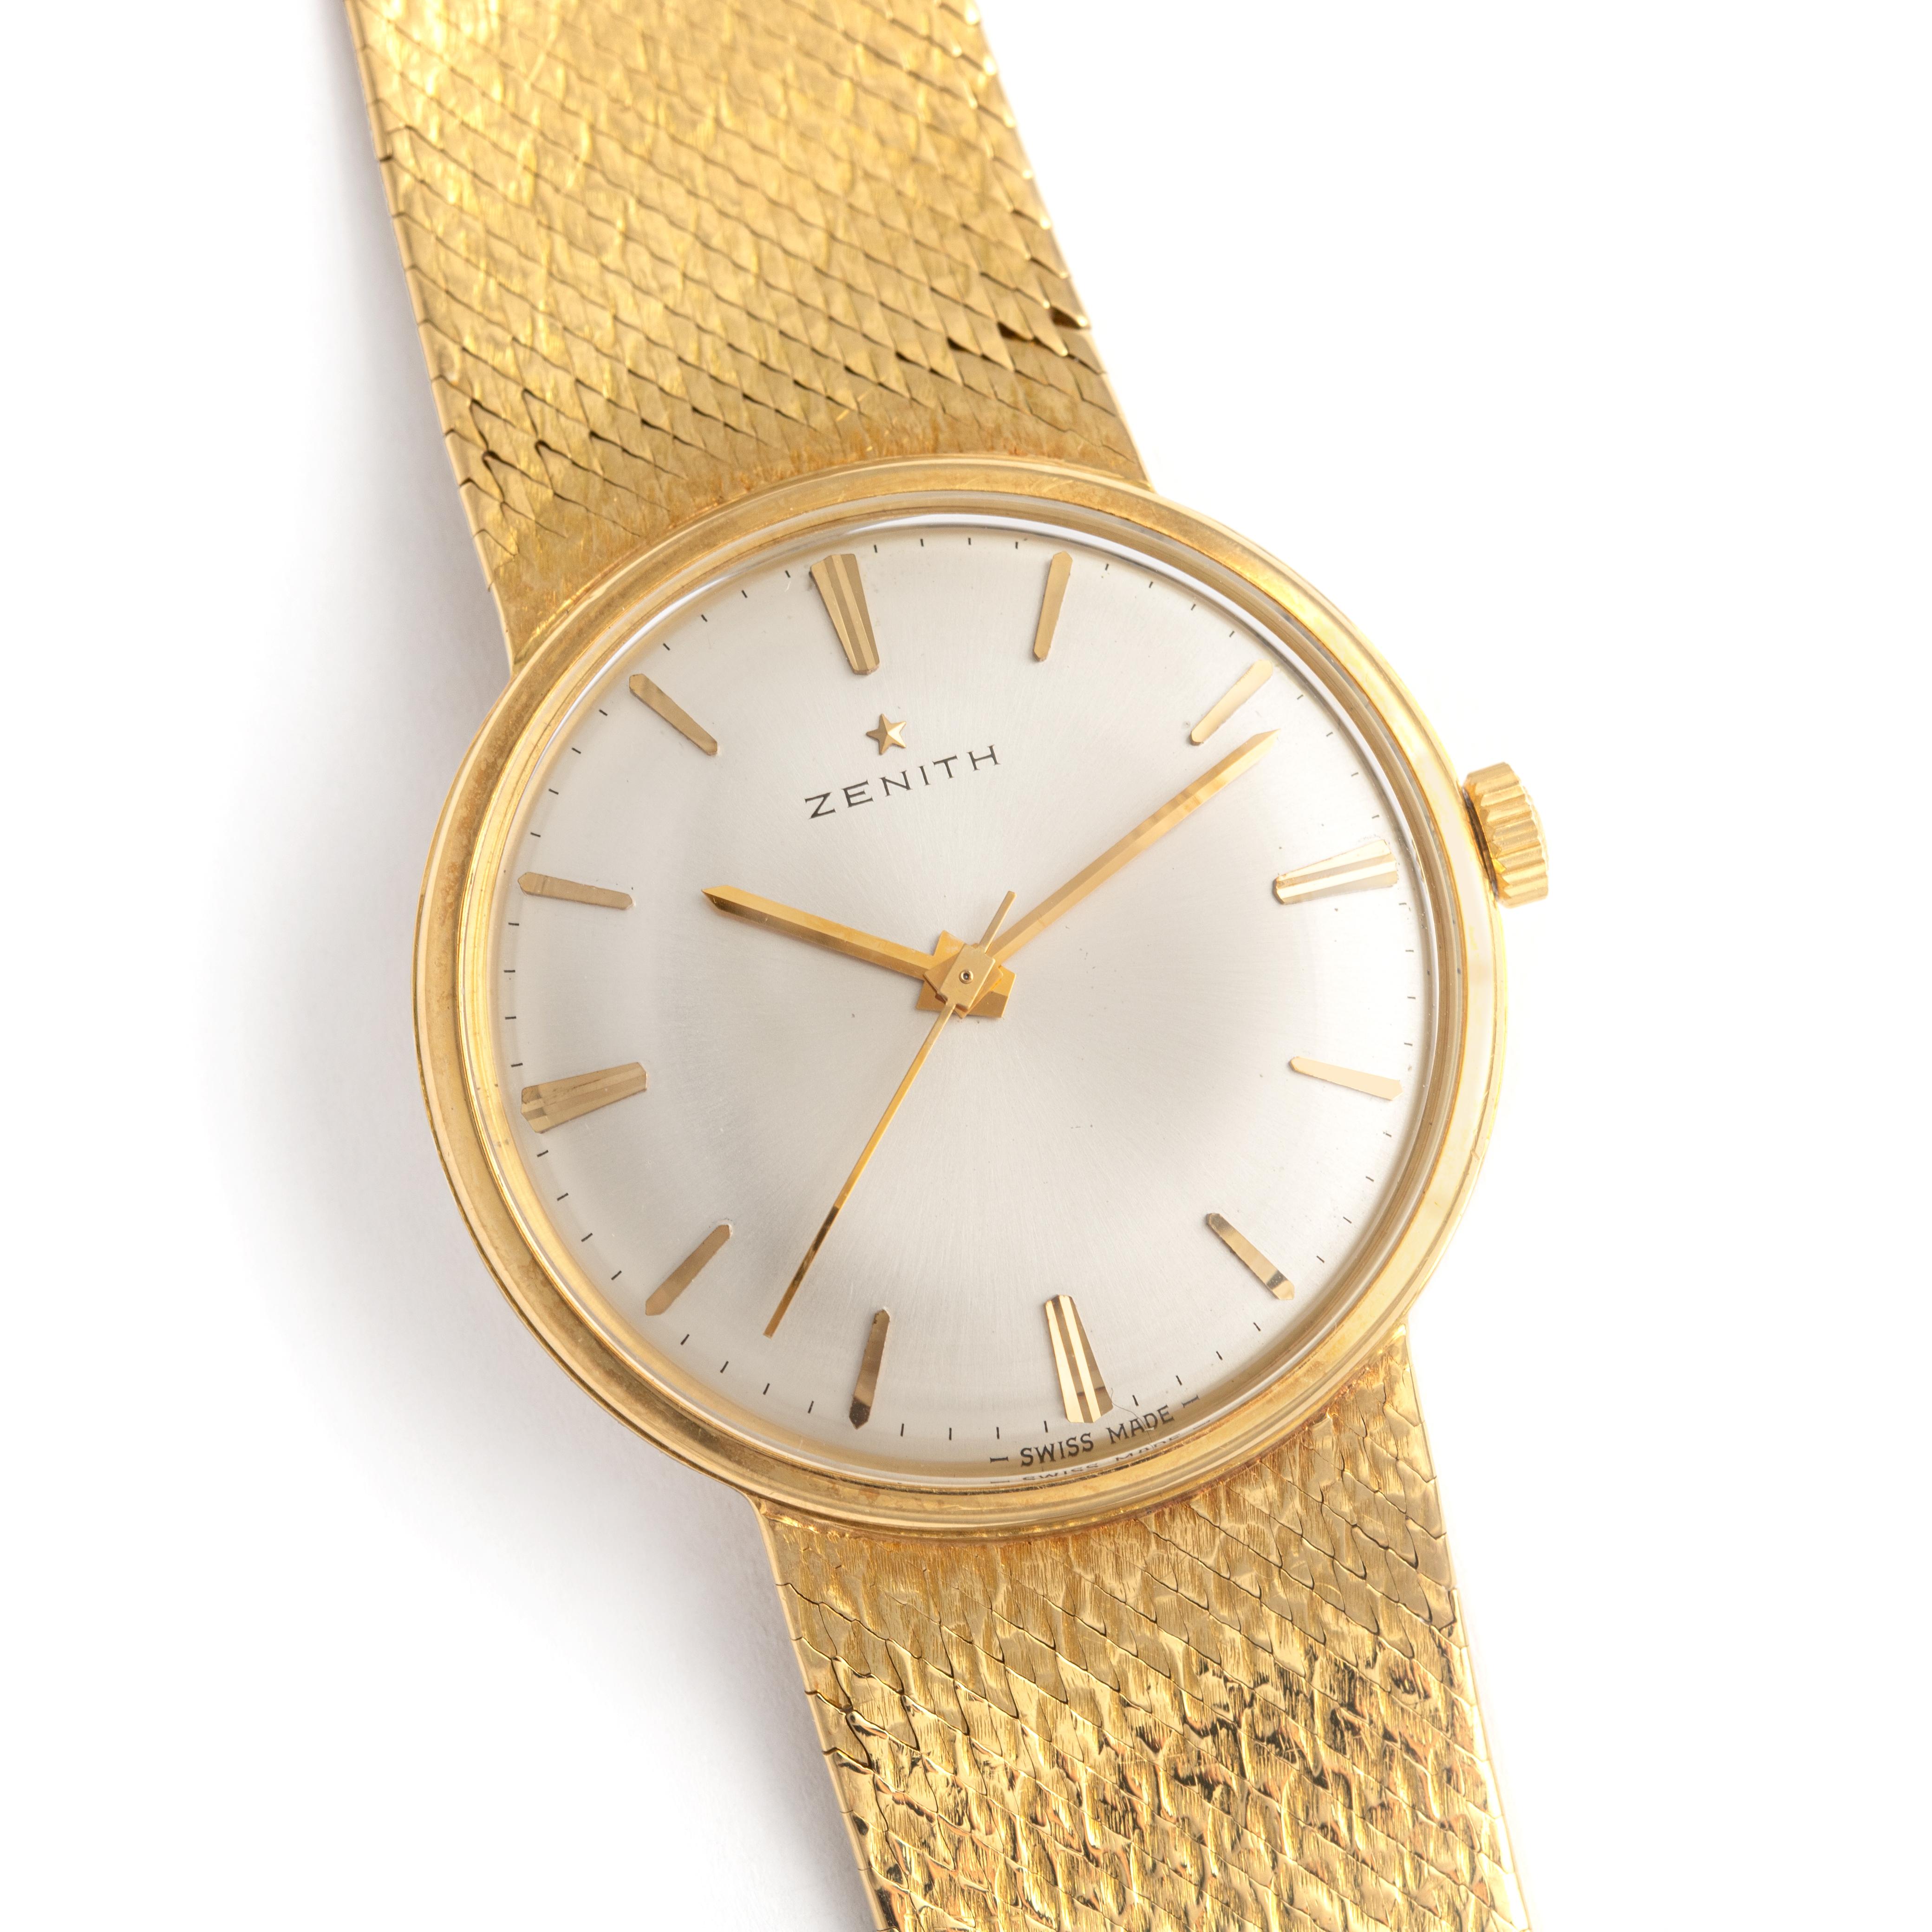 Zenith Yellow Gold 18K Wristwatch.
Swiss made. Signed Zenith, numbered.
Circa 1970.